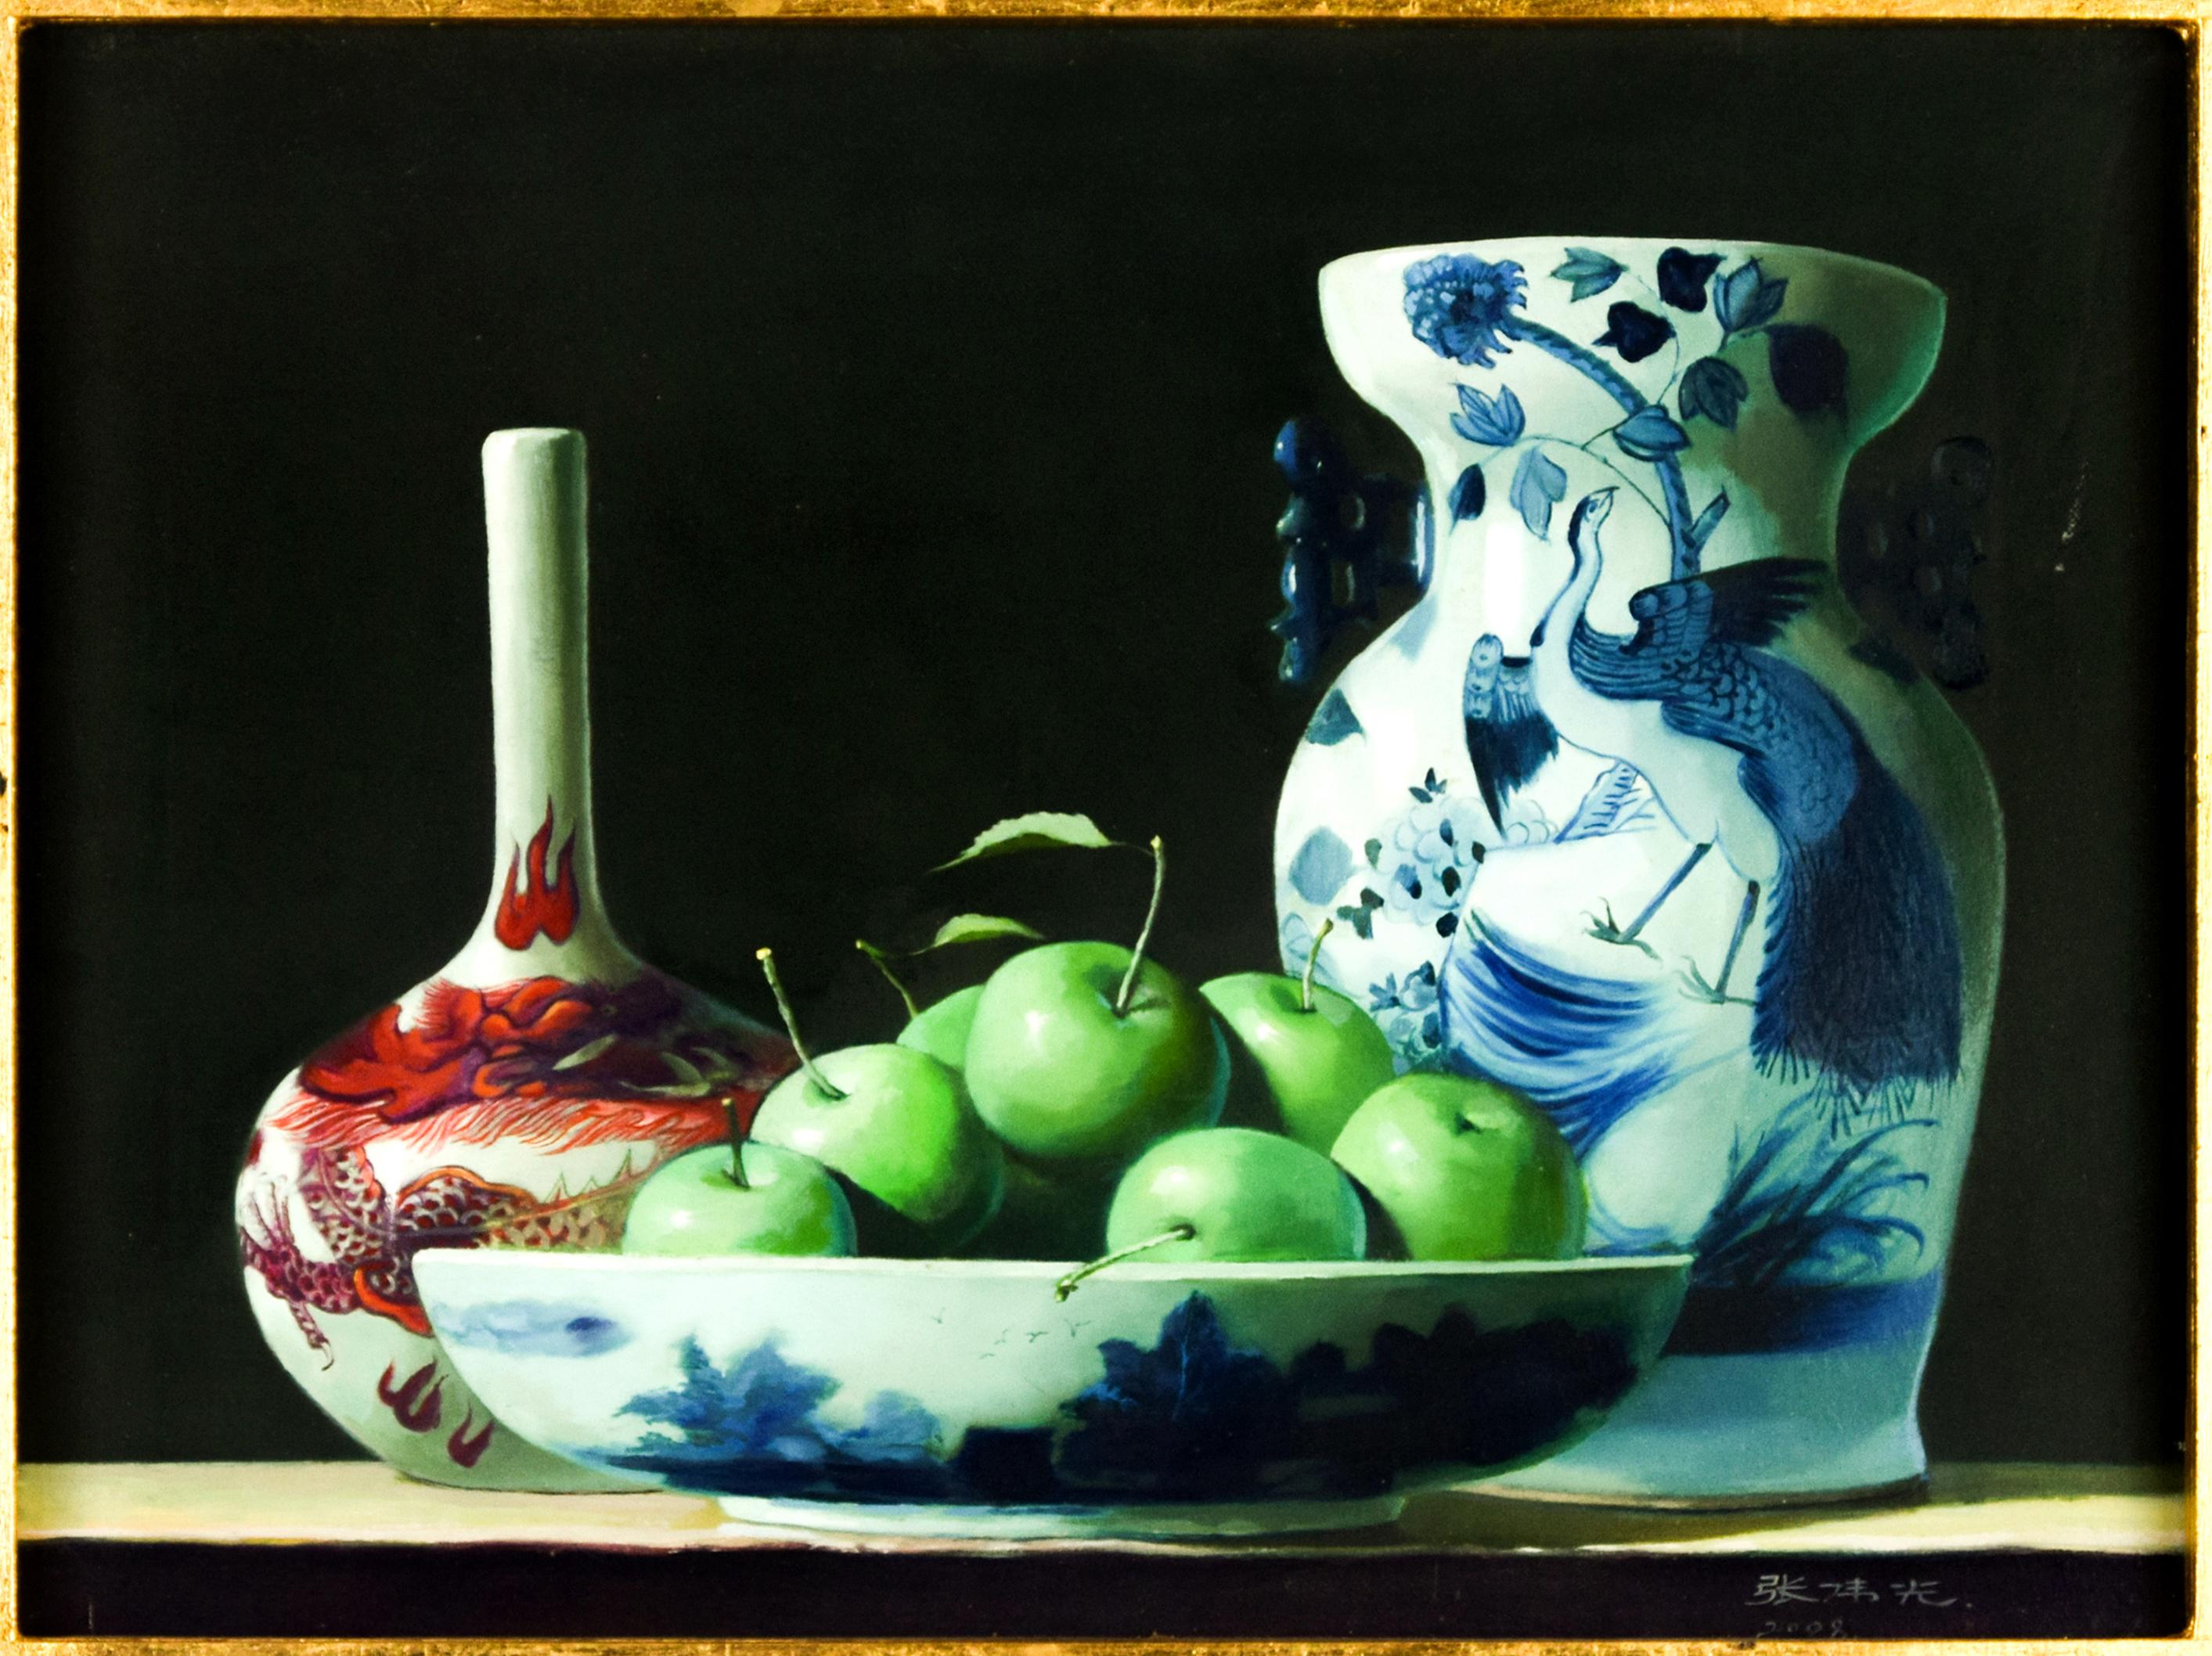 Still Life - Oil on Canvas - 2008 - Contemporary Painting by Zhang Wei Guang